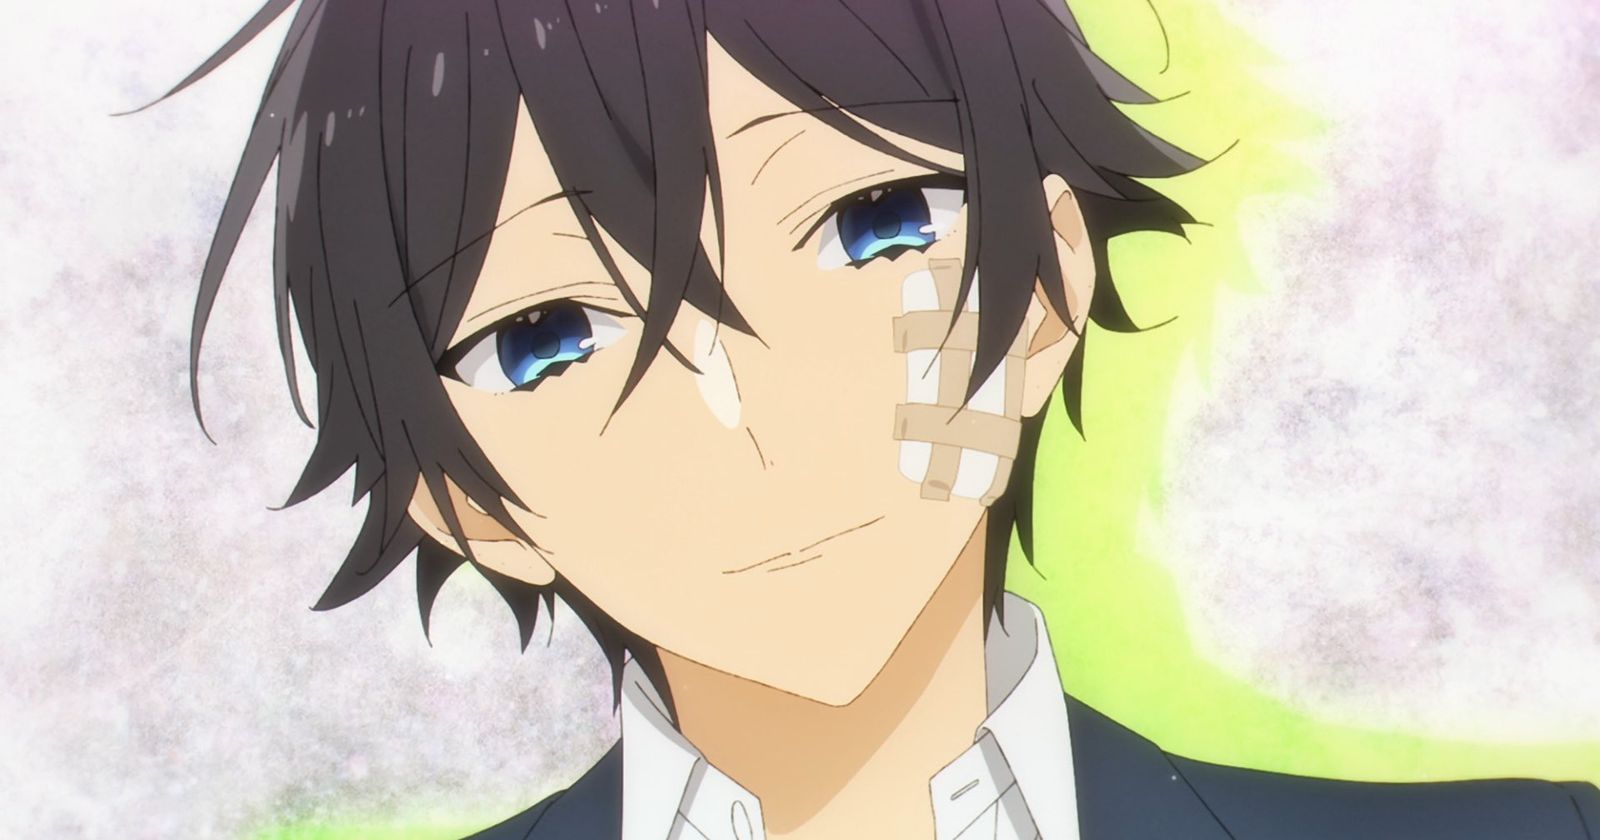 Horimiya: The Missing Pieces episode 2 - Release date, countdown